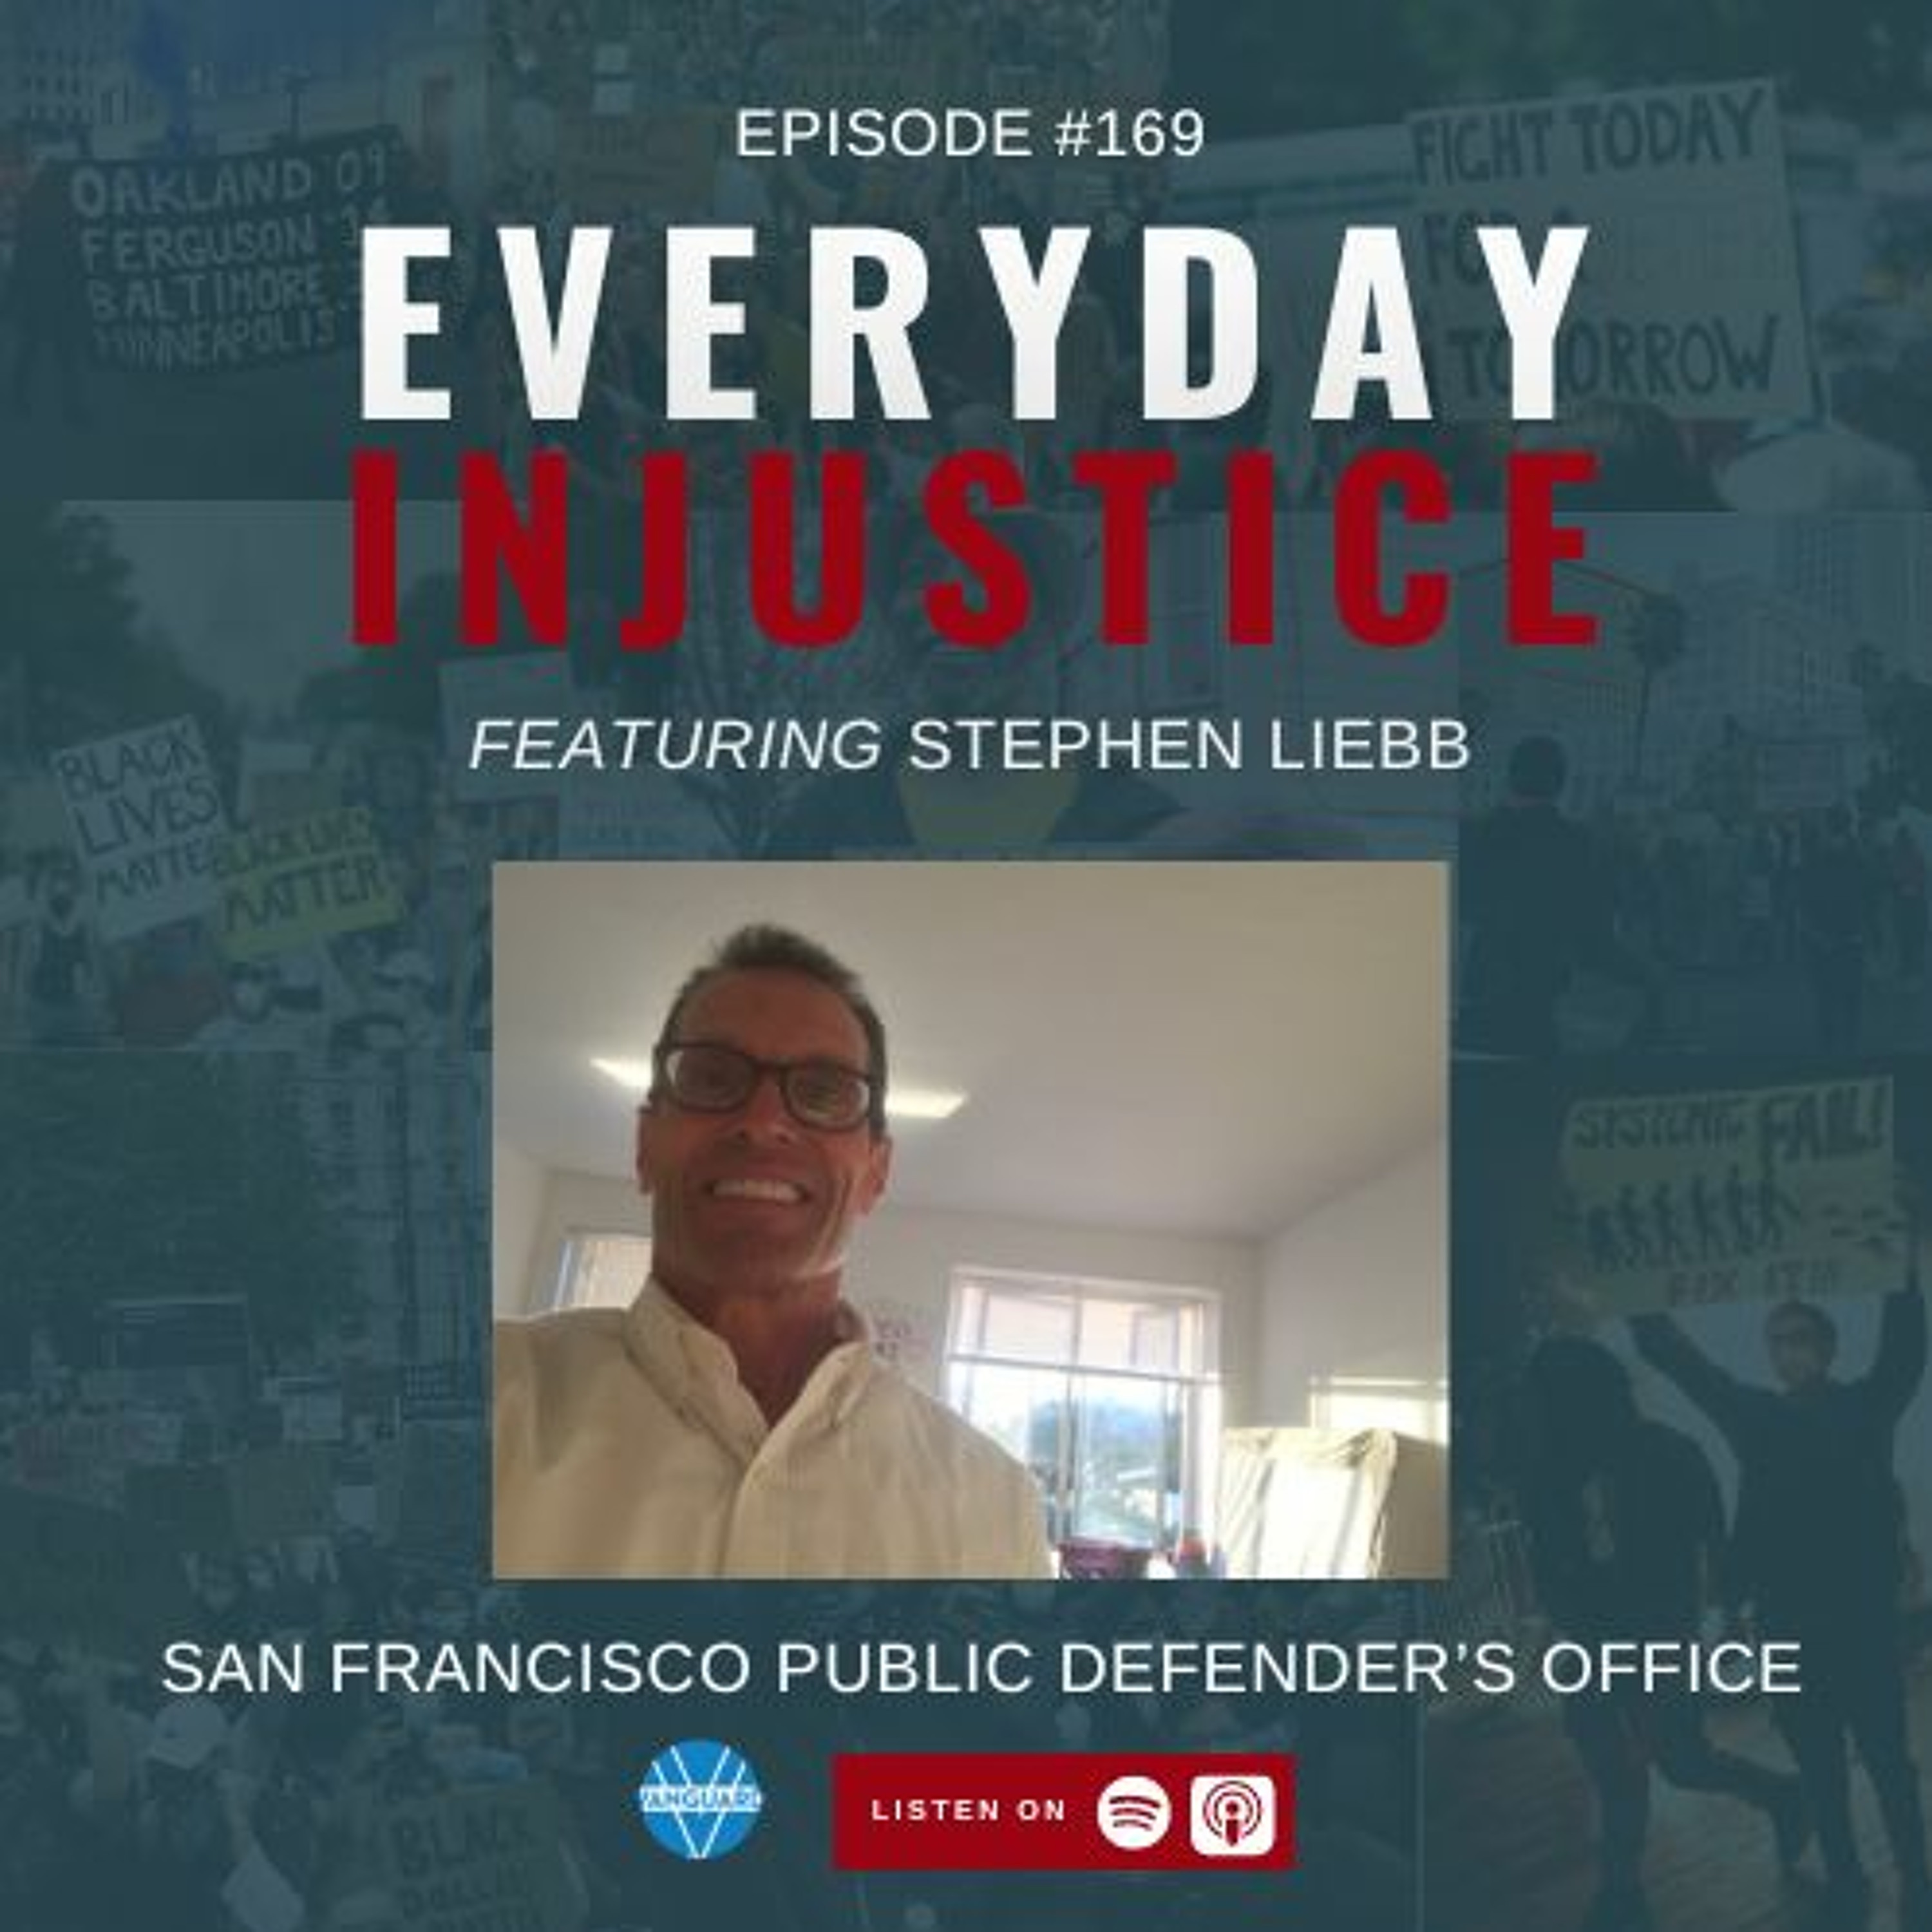 Everyday Injustice Podcast Episode 169: Stephen Liebb, Incarcerated 33 Years, Helps to Free Others